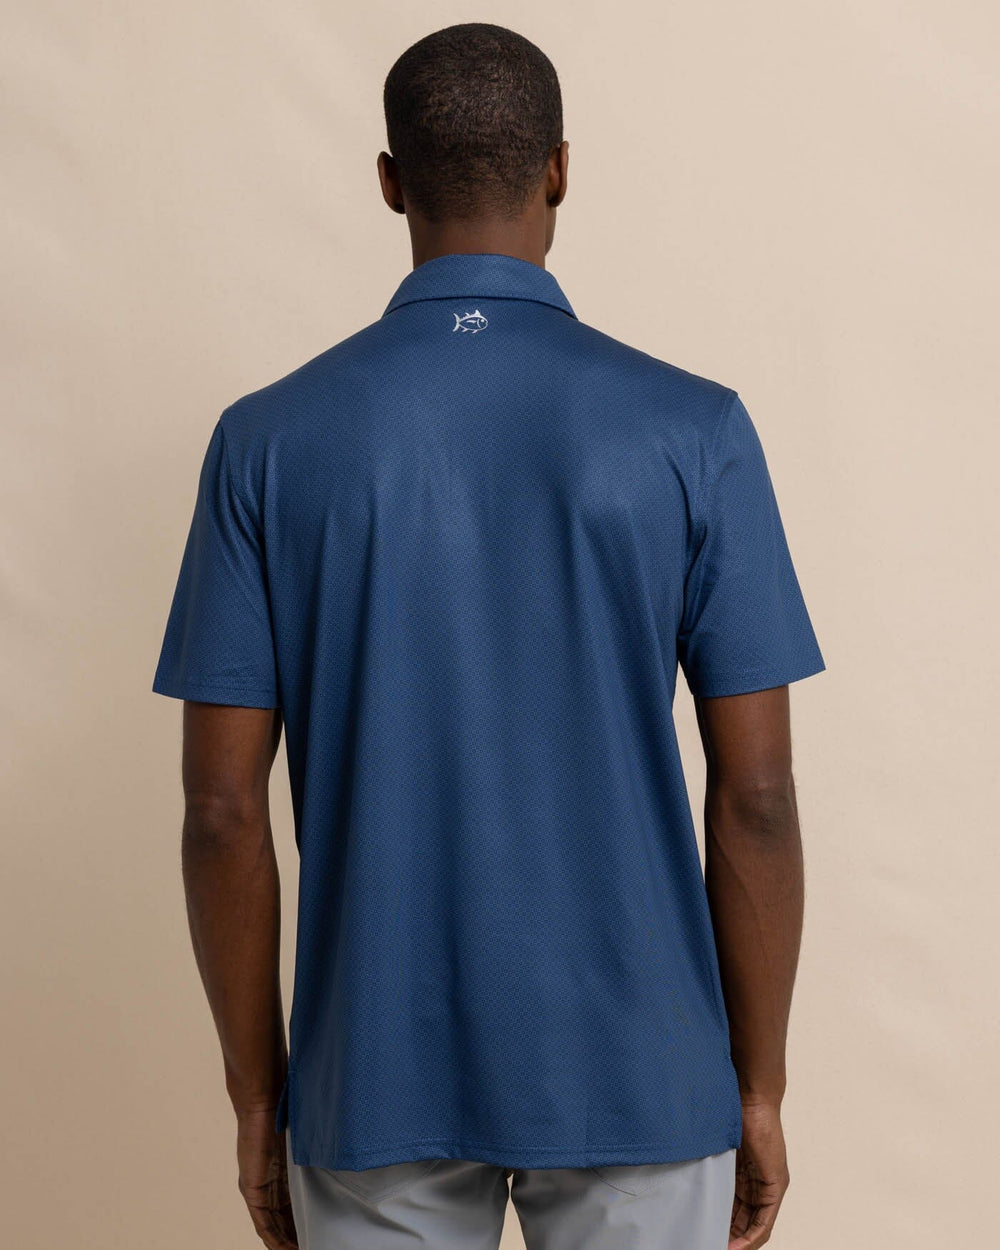 The back view of the Southern Tide Driver Coastal Geo Polo Shirt by Southern Tide - Dress Blue